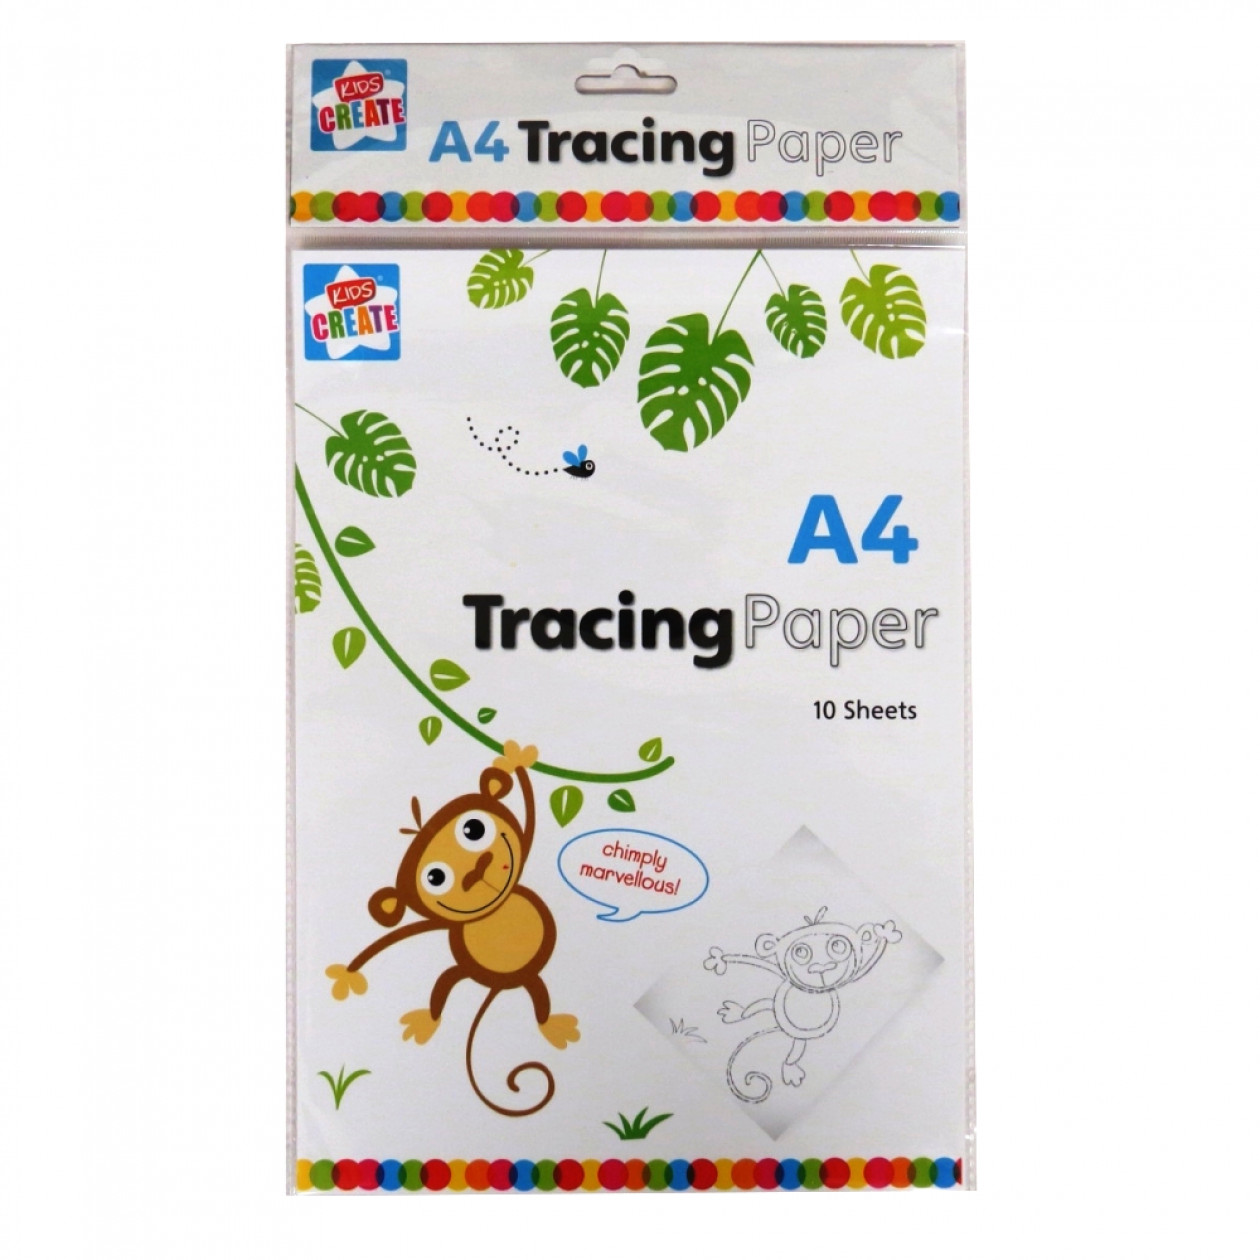 Kids Create Anker A4 Tracing Paper 10 Sheets